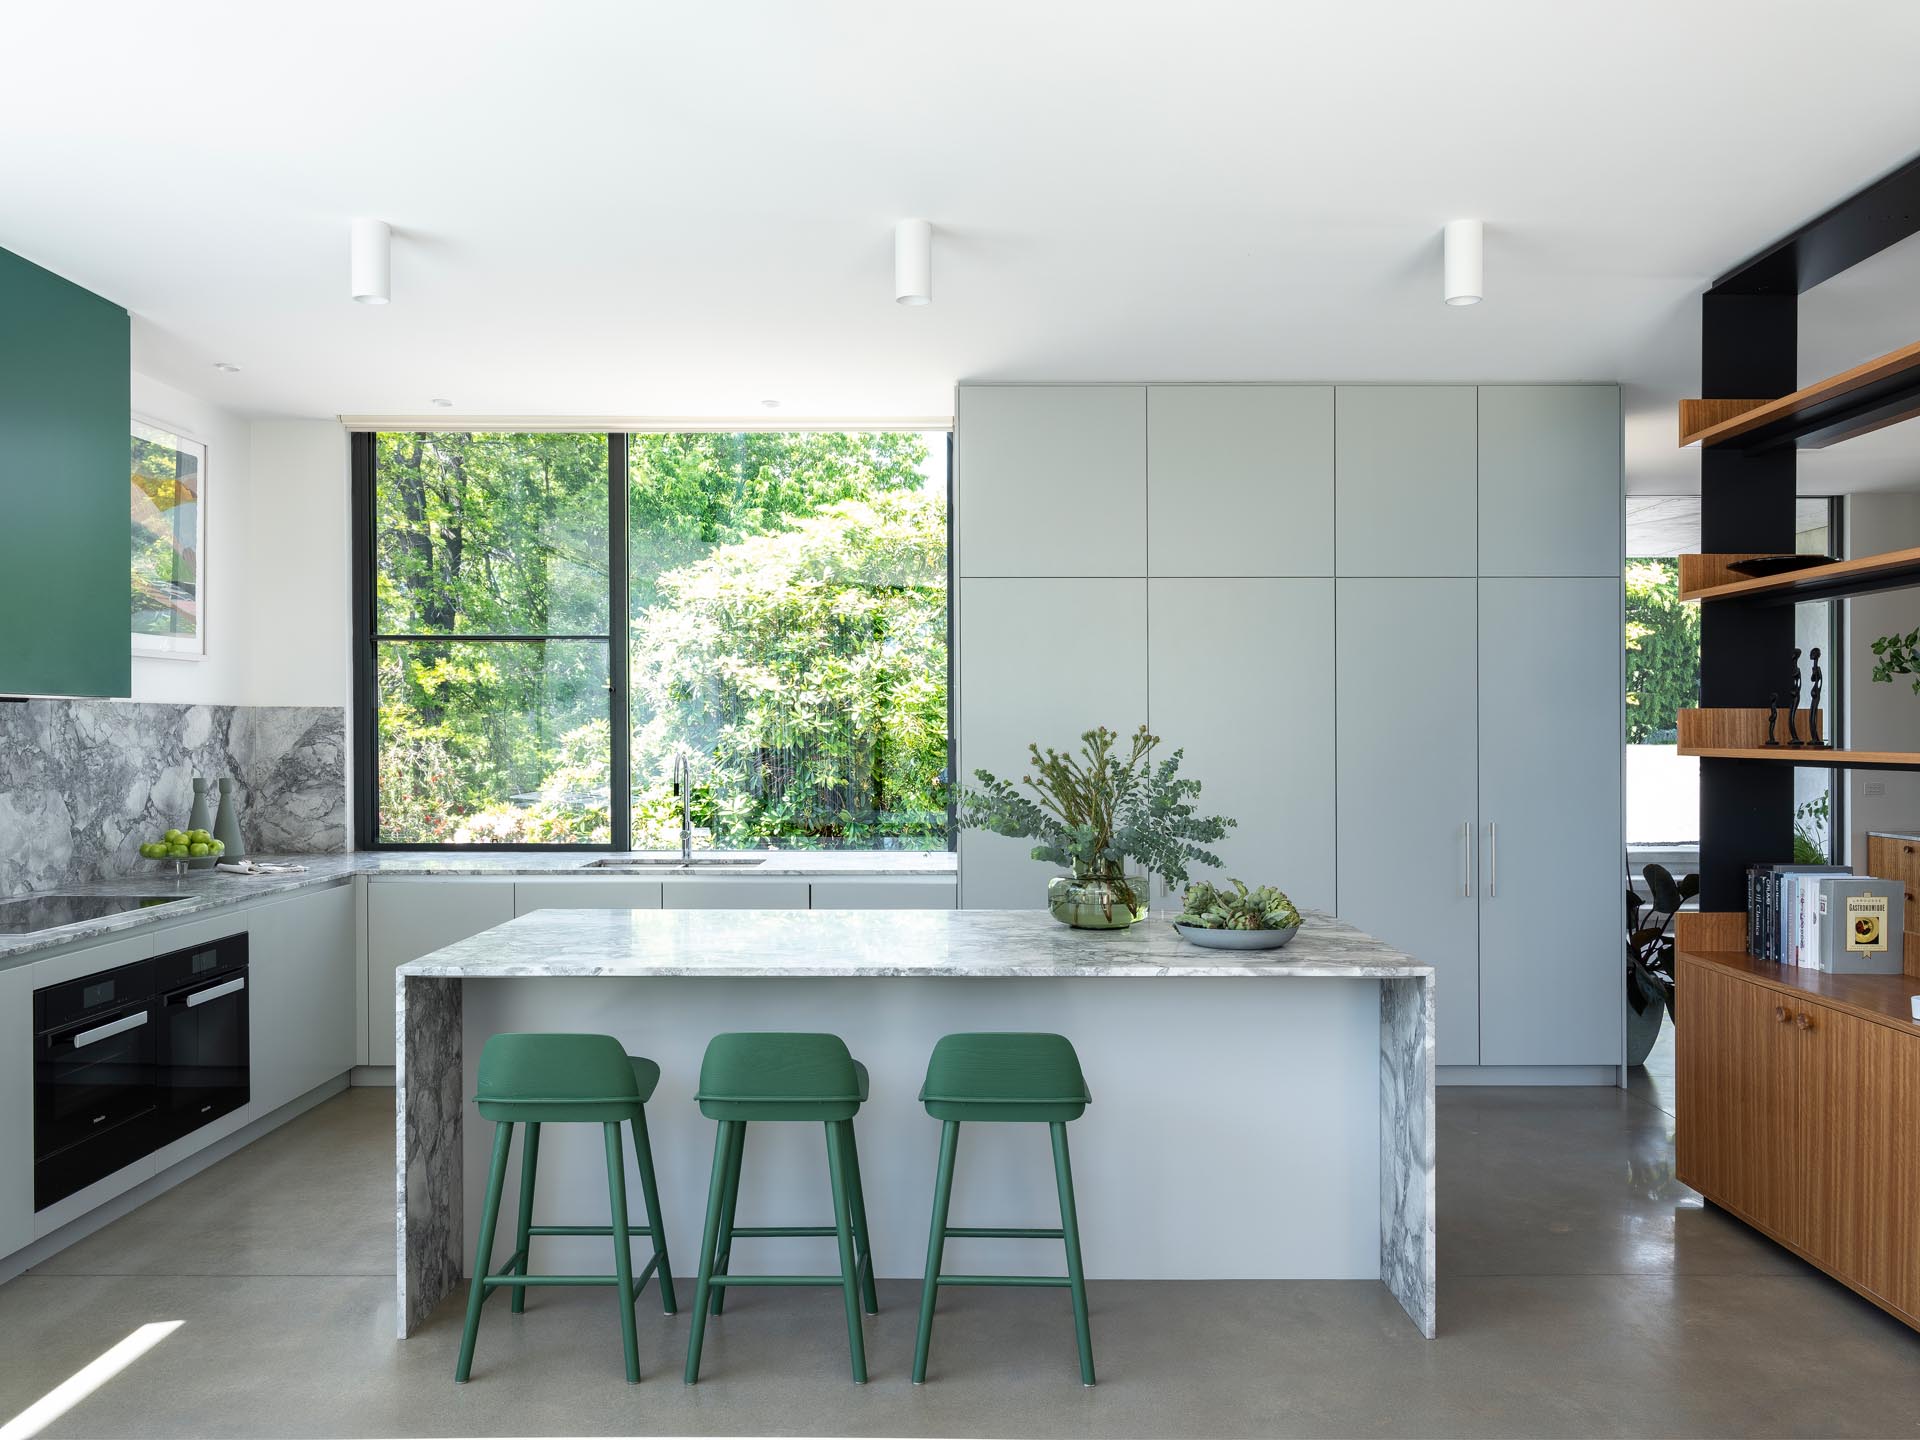 This kitchen has minimalist light gray cabinets that complement the marble countertops and concrete floors, while green accents add a pop of color.